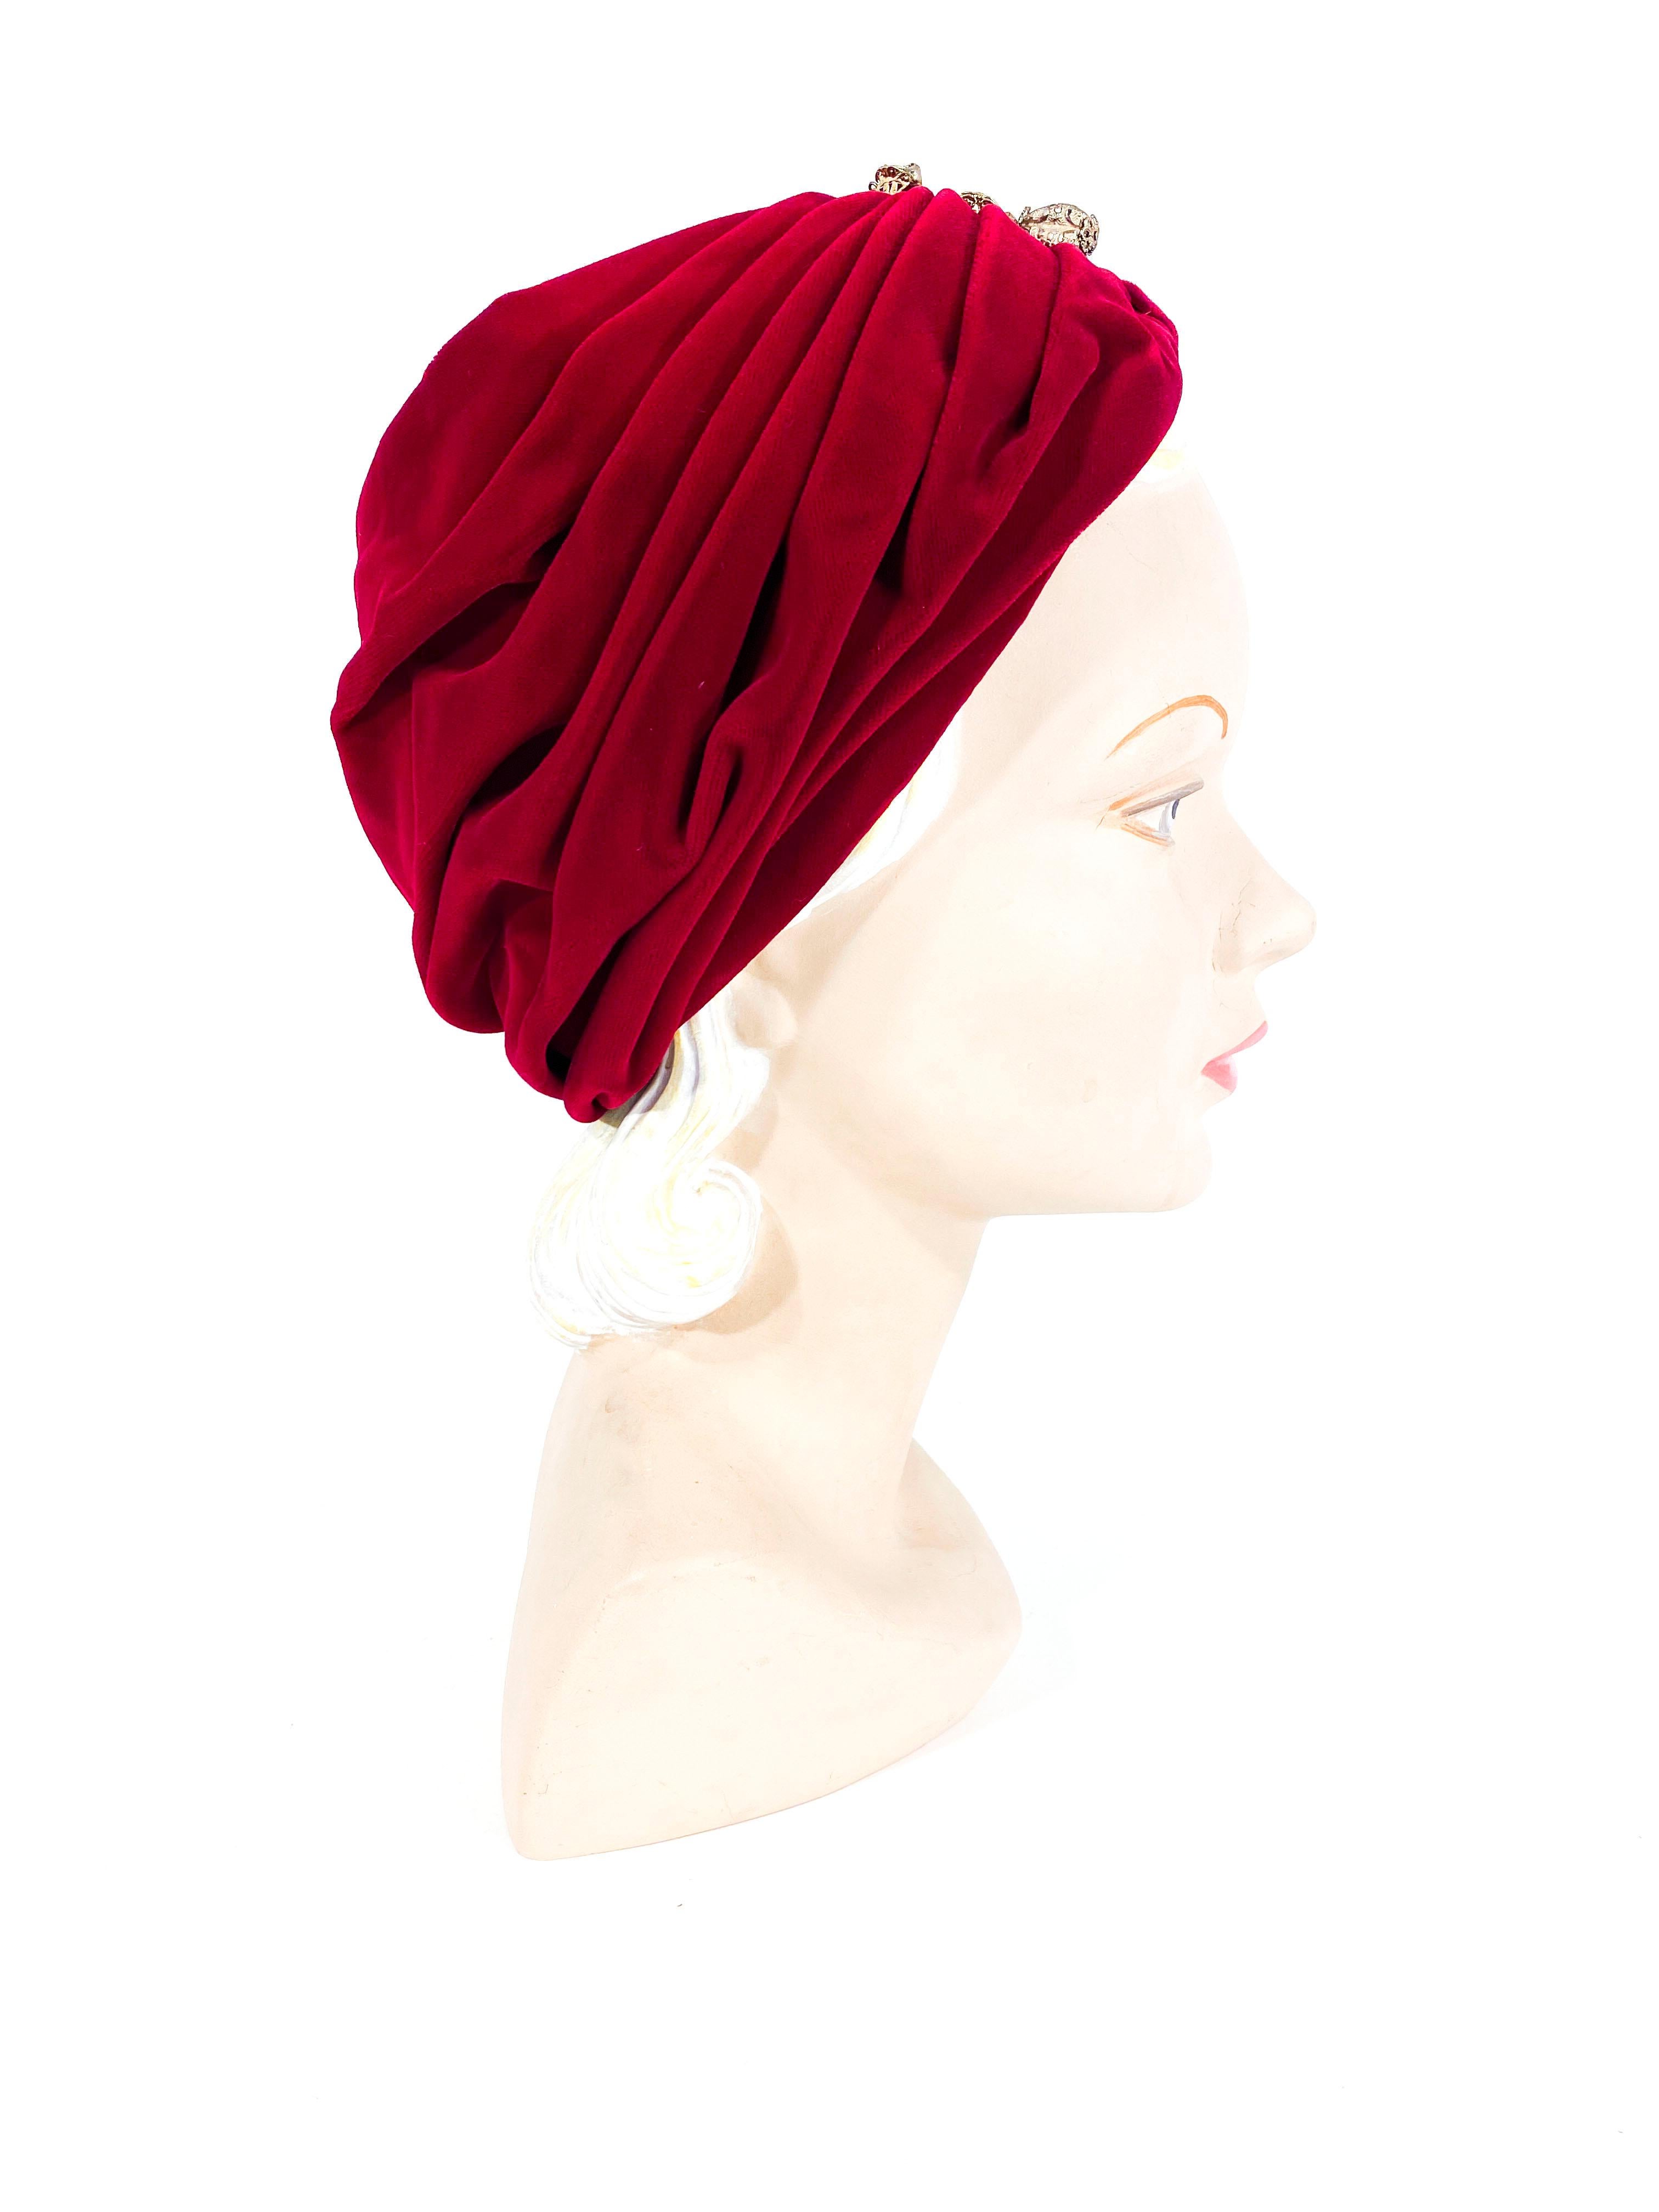 1950s red rayon velvet hand ruched turban decorated with a hand pierced brass and faux tiger's eye ornament. The interior is lined in net finished with a grosgrain ribbon. 